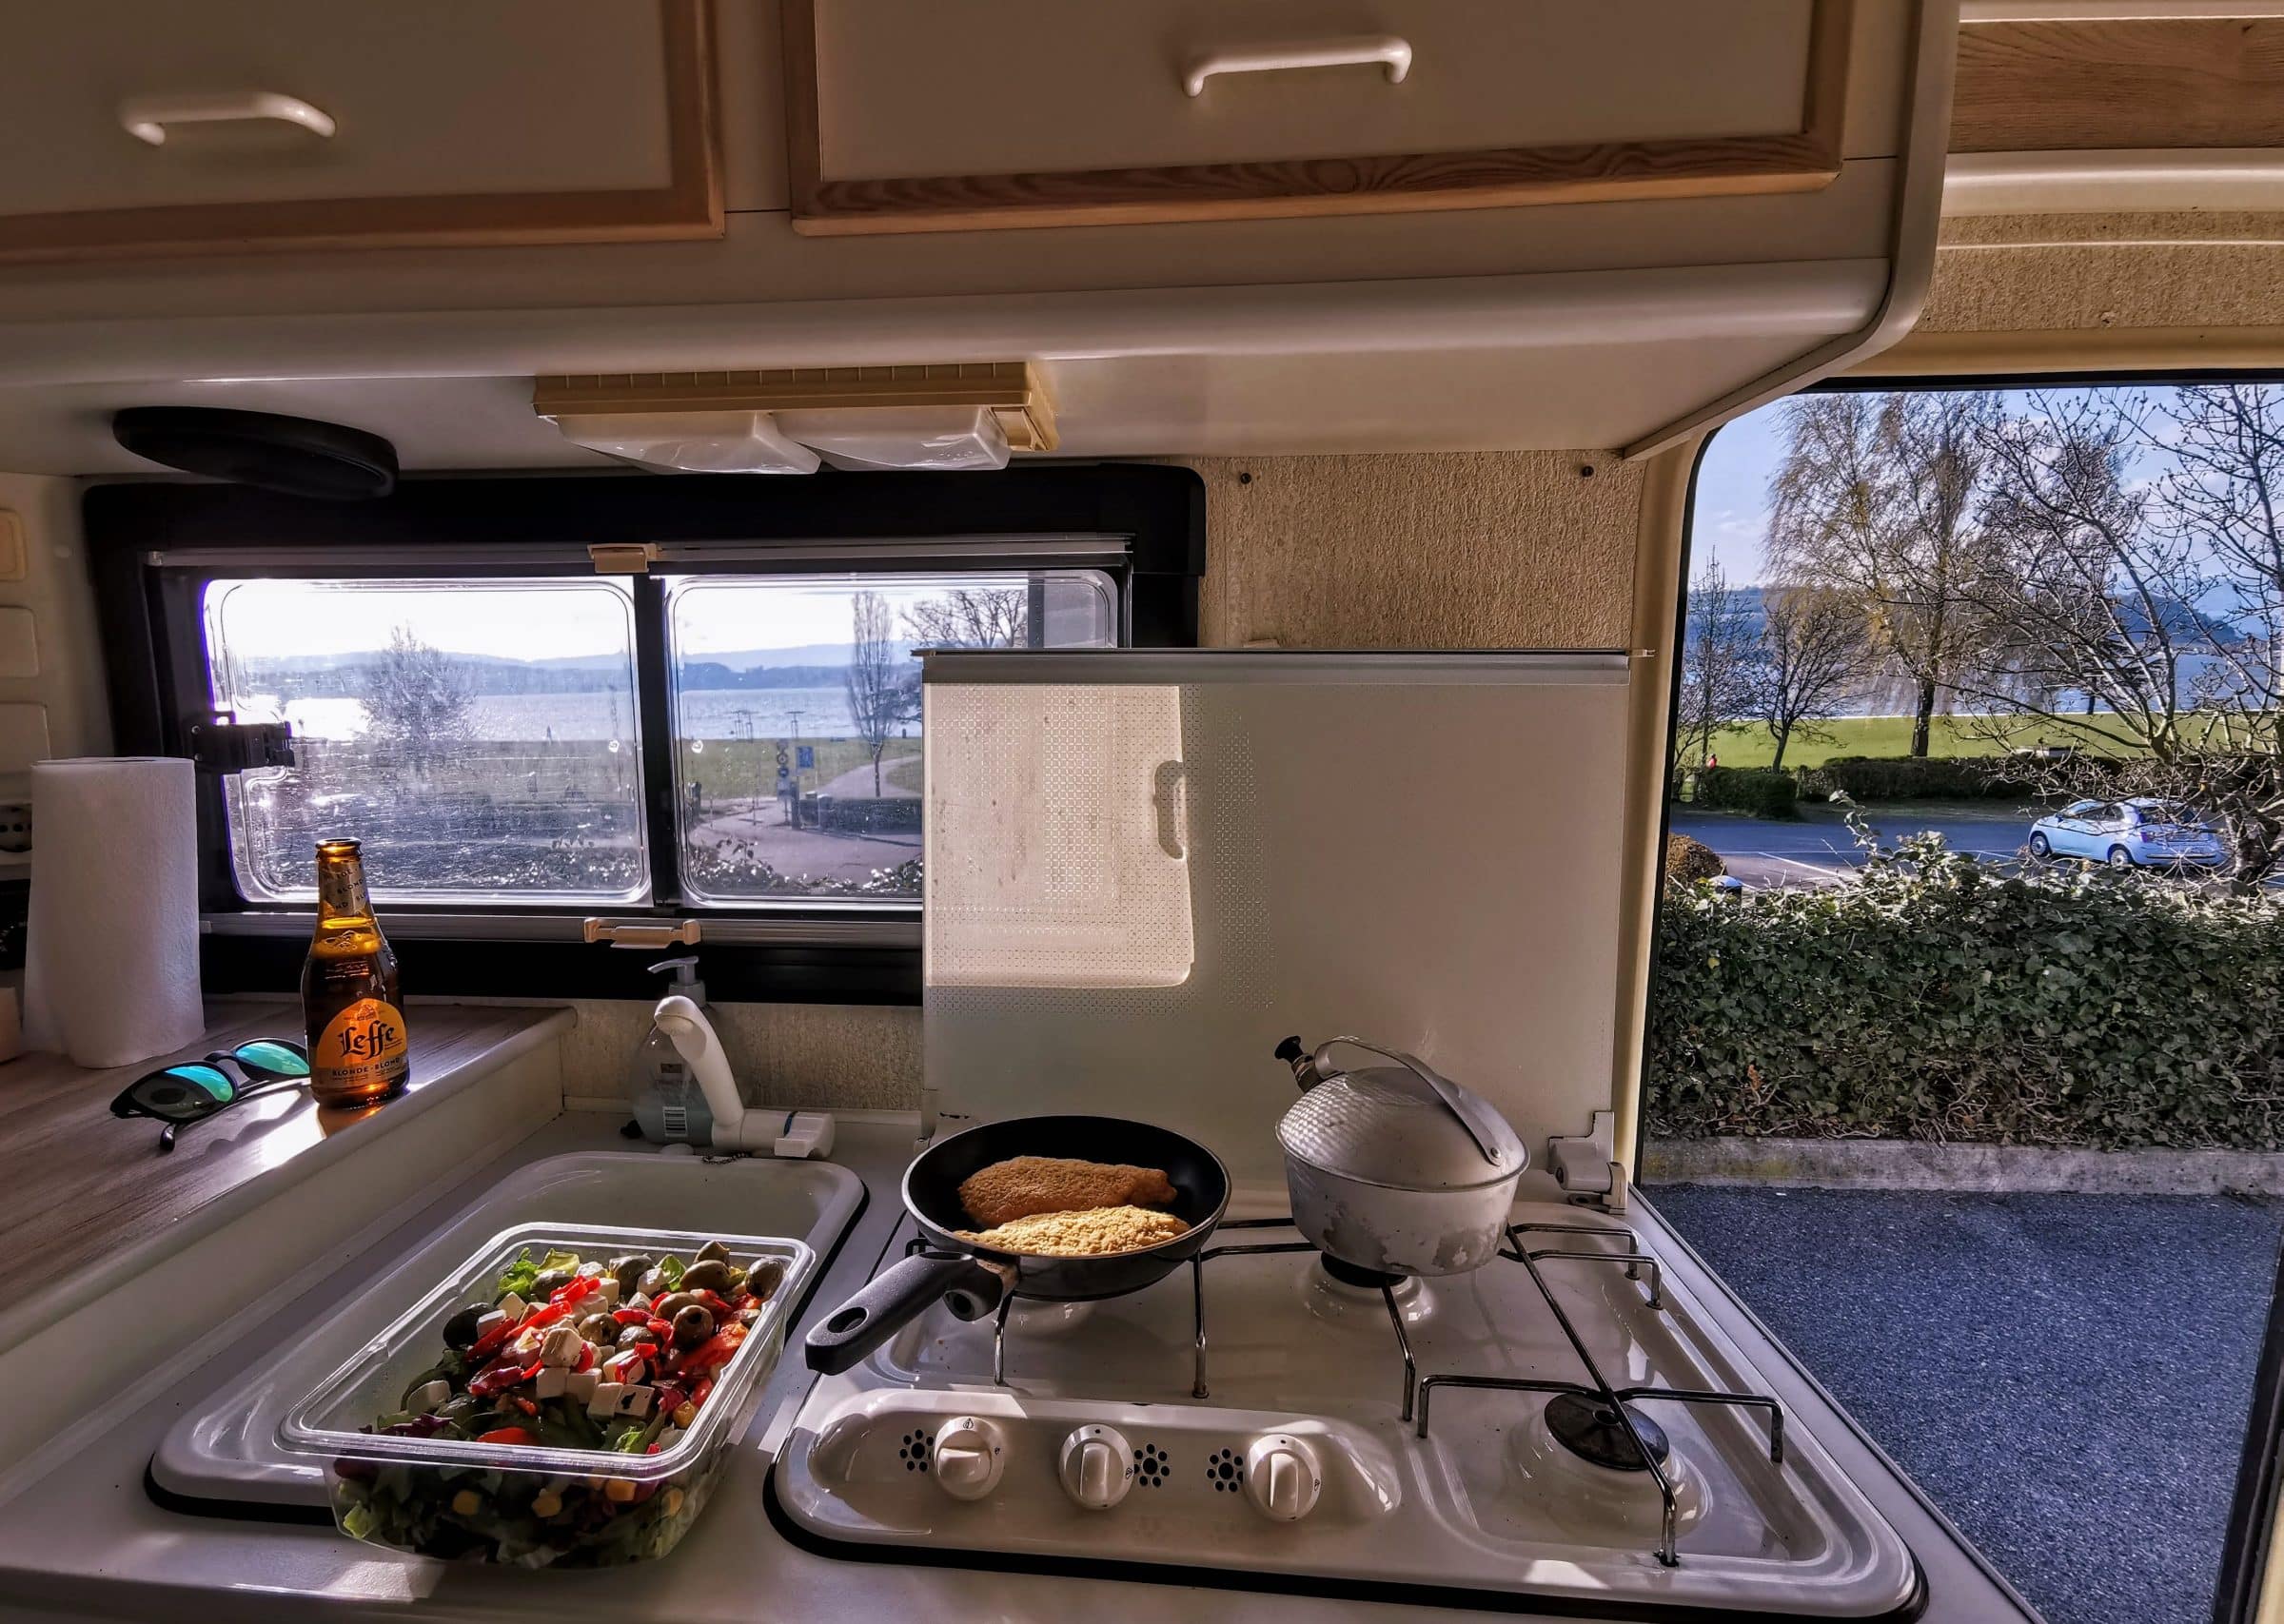 Prepare food in the motorhome with a view of the lake